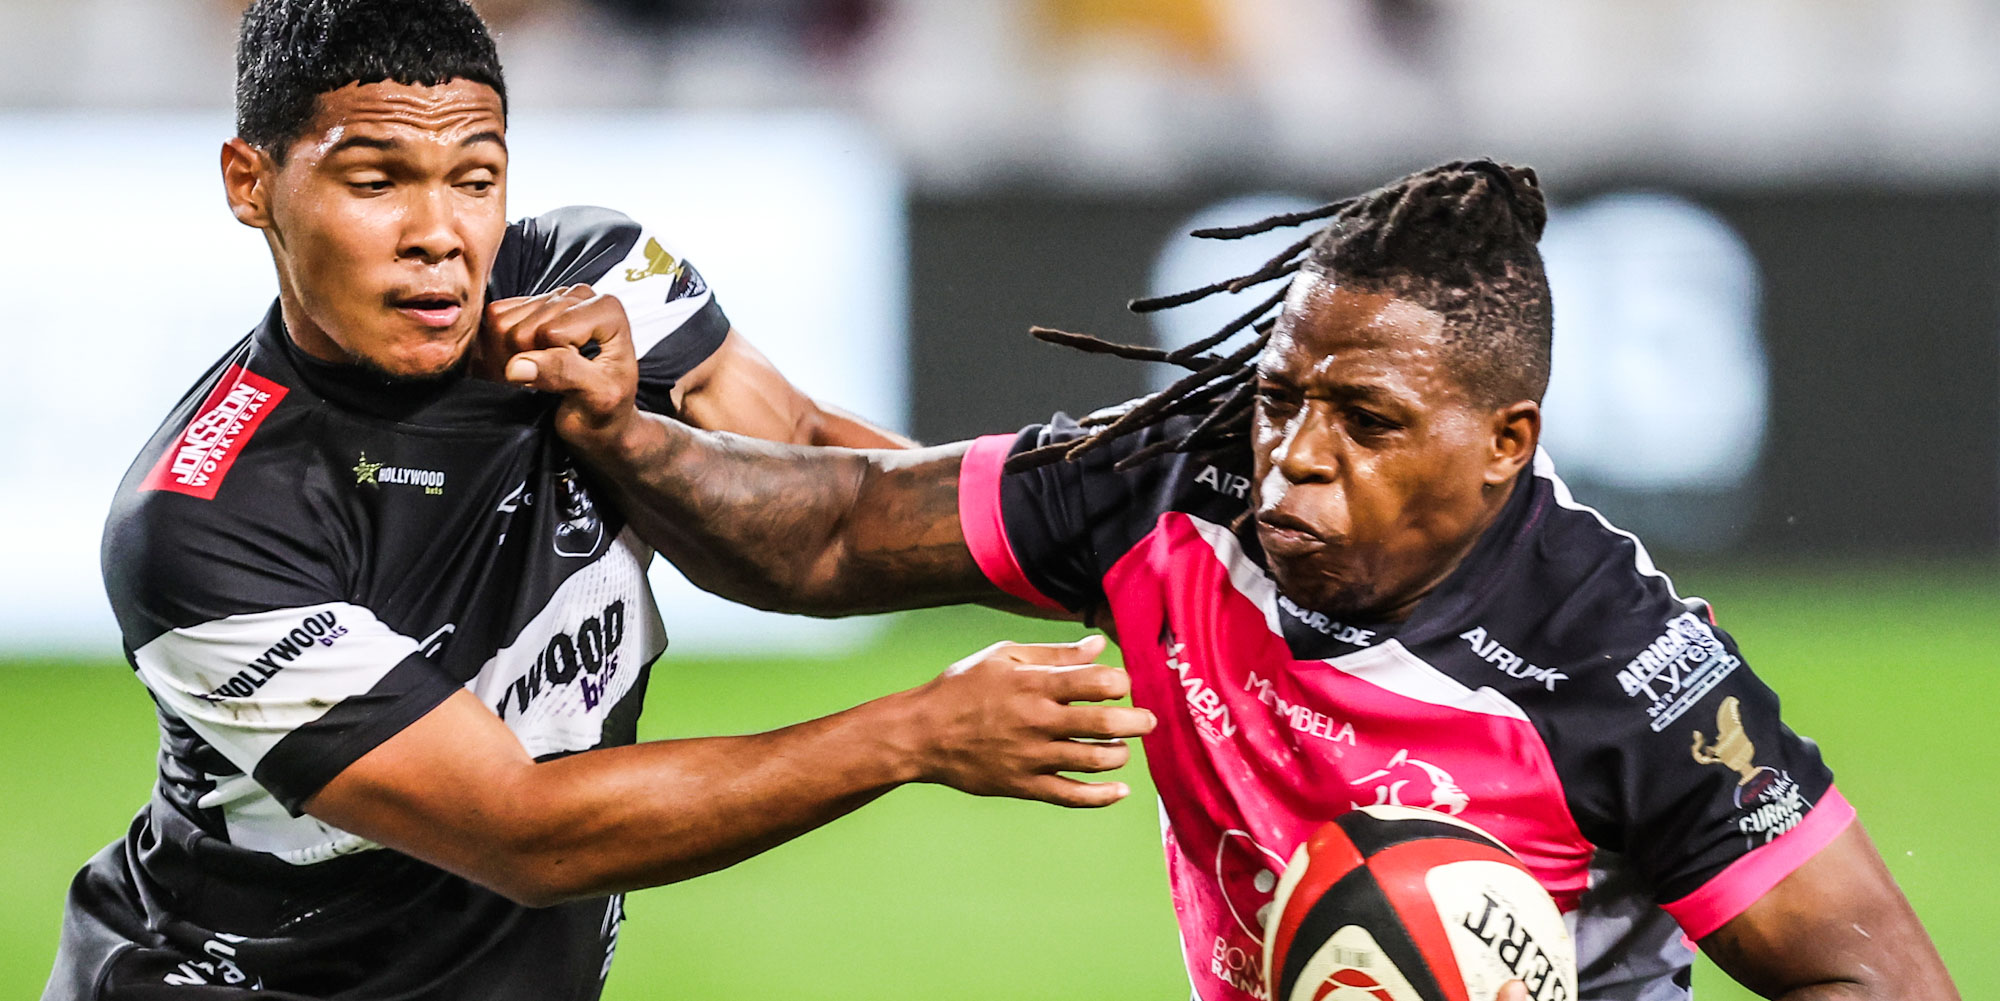 Phiko Sobahle was one of the Airlink Pumas' try scorers in Durban.